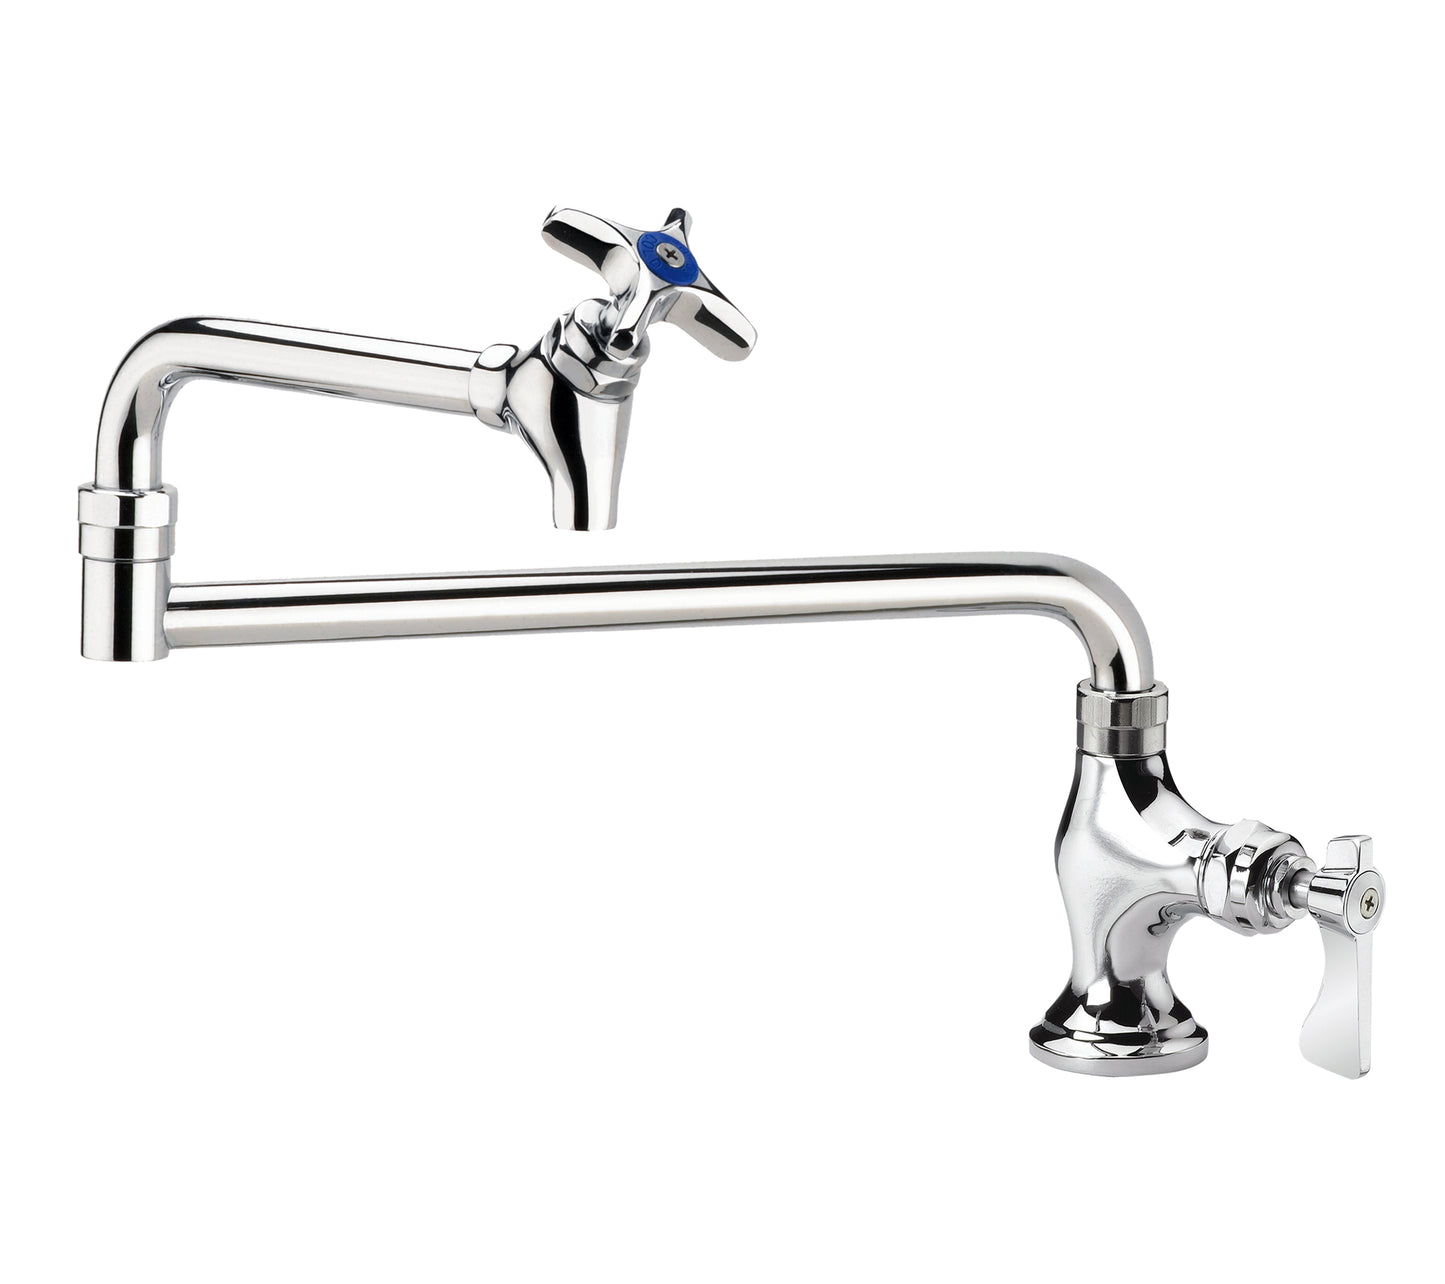 Krowne 16-161L Low Lead ROYAL SERIES Deck Mount POT FILLER WITH 12" JOINTED SPOUT (TWO 6" SECTIONS)                 